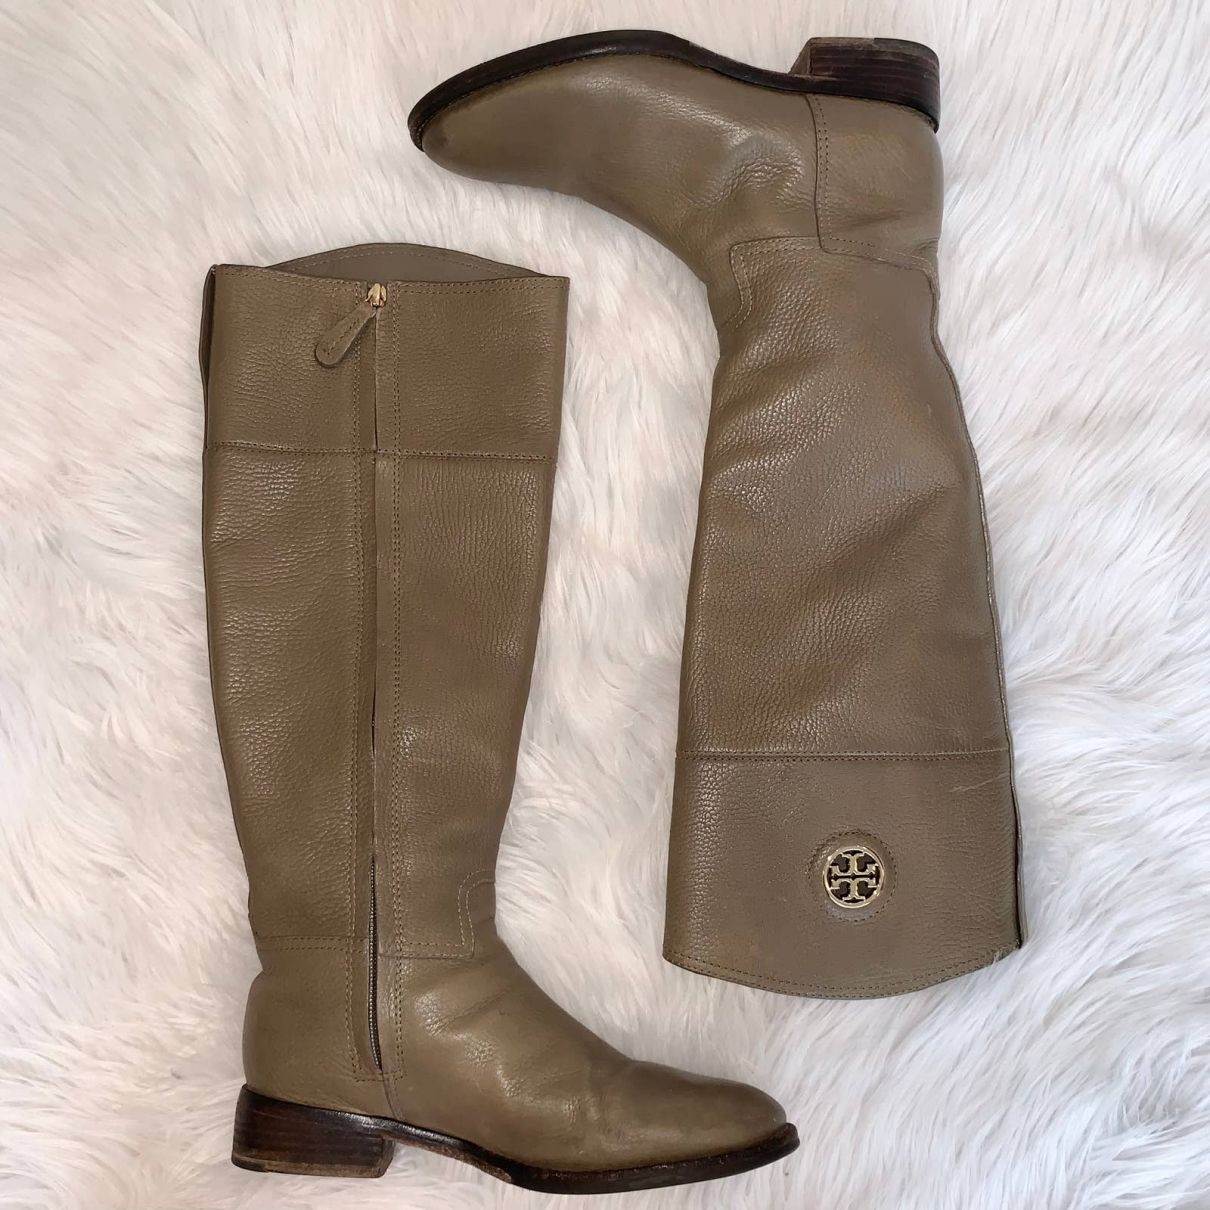 Leather boots Tory Burch Beige size 7 US in Leather - 26796021